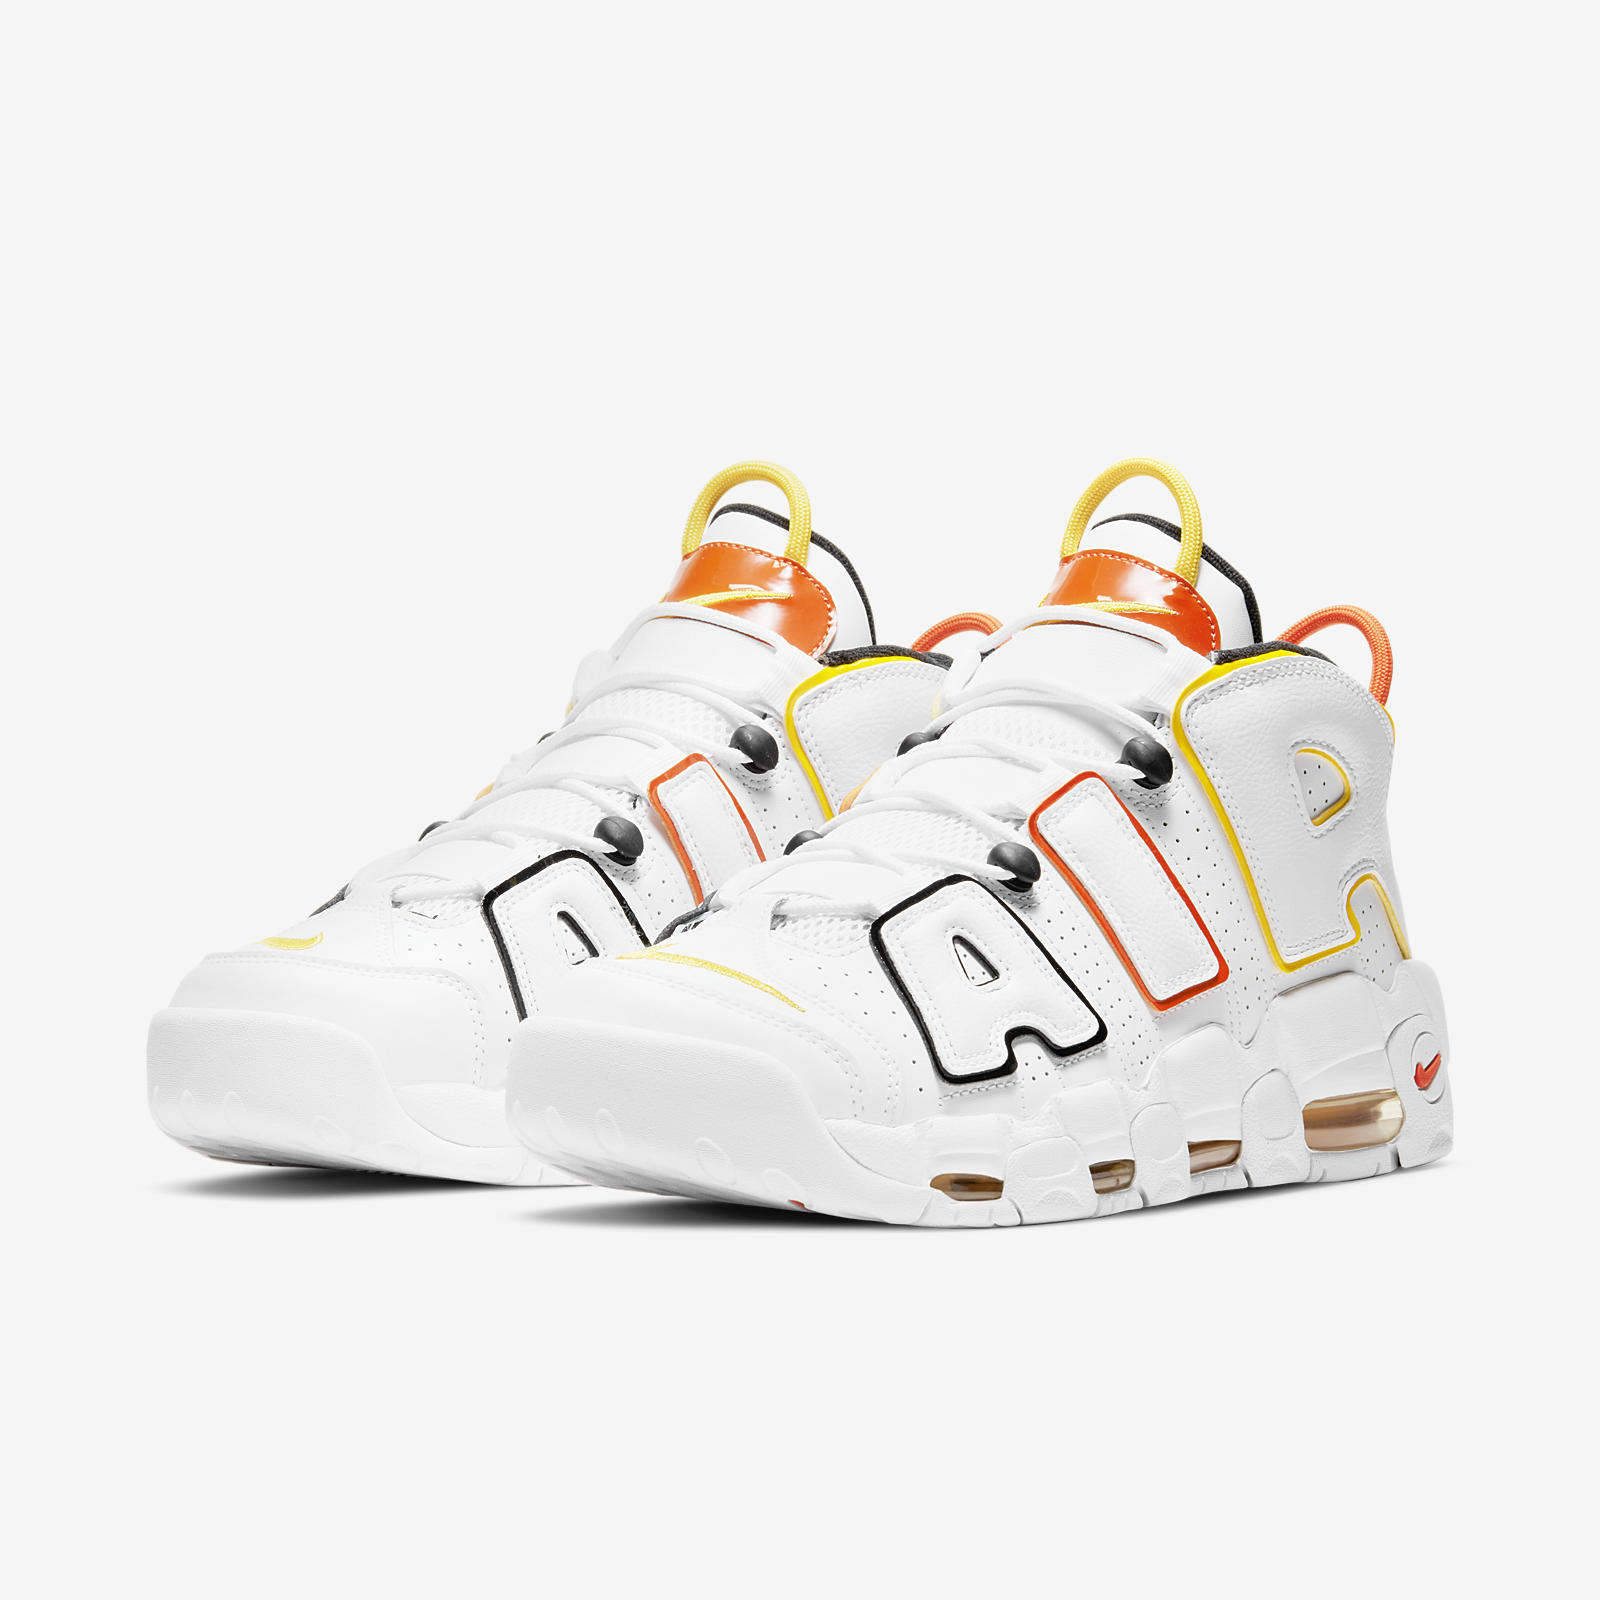 Nike Air More Uptempo
Rayguns